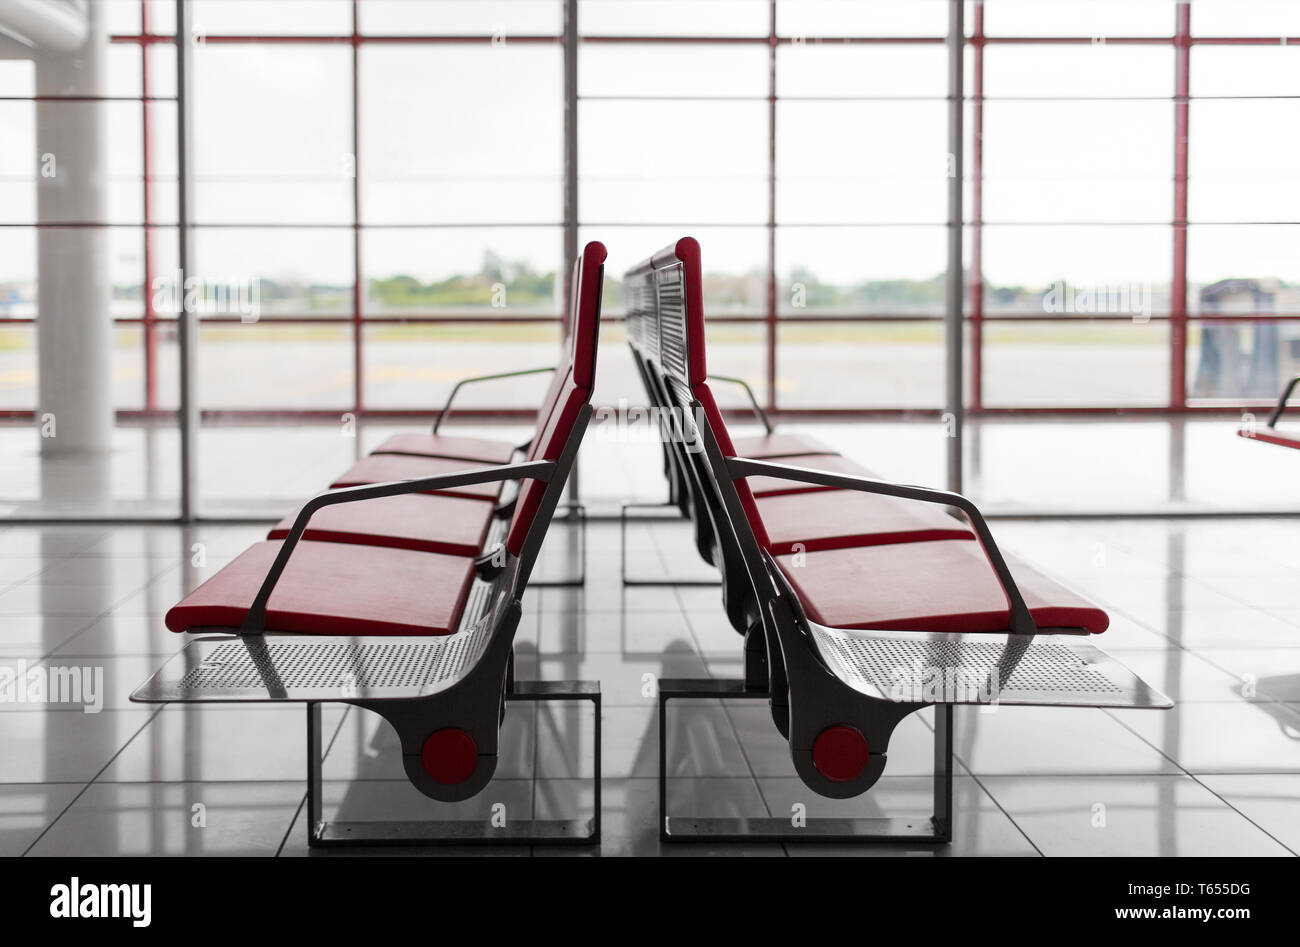 empty seats at airport terminal Stock Photo